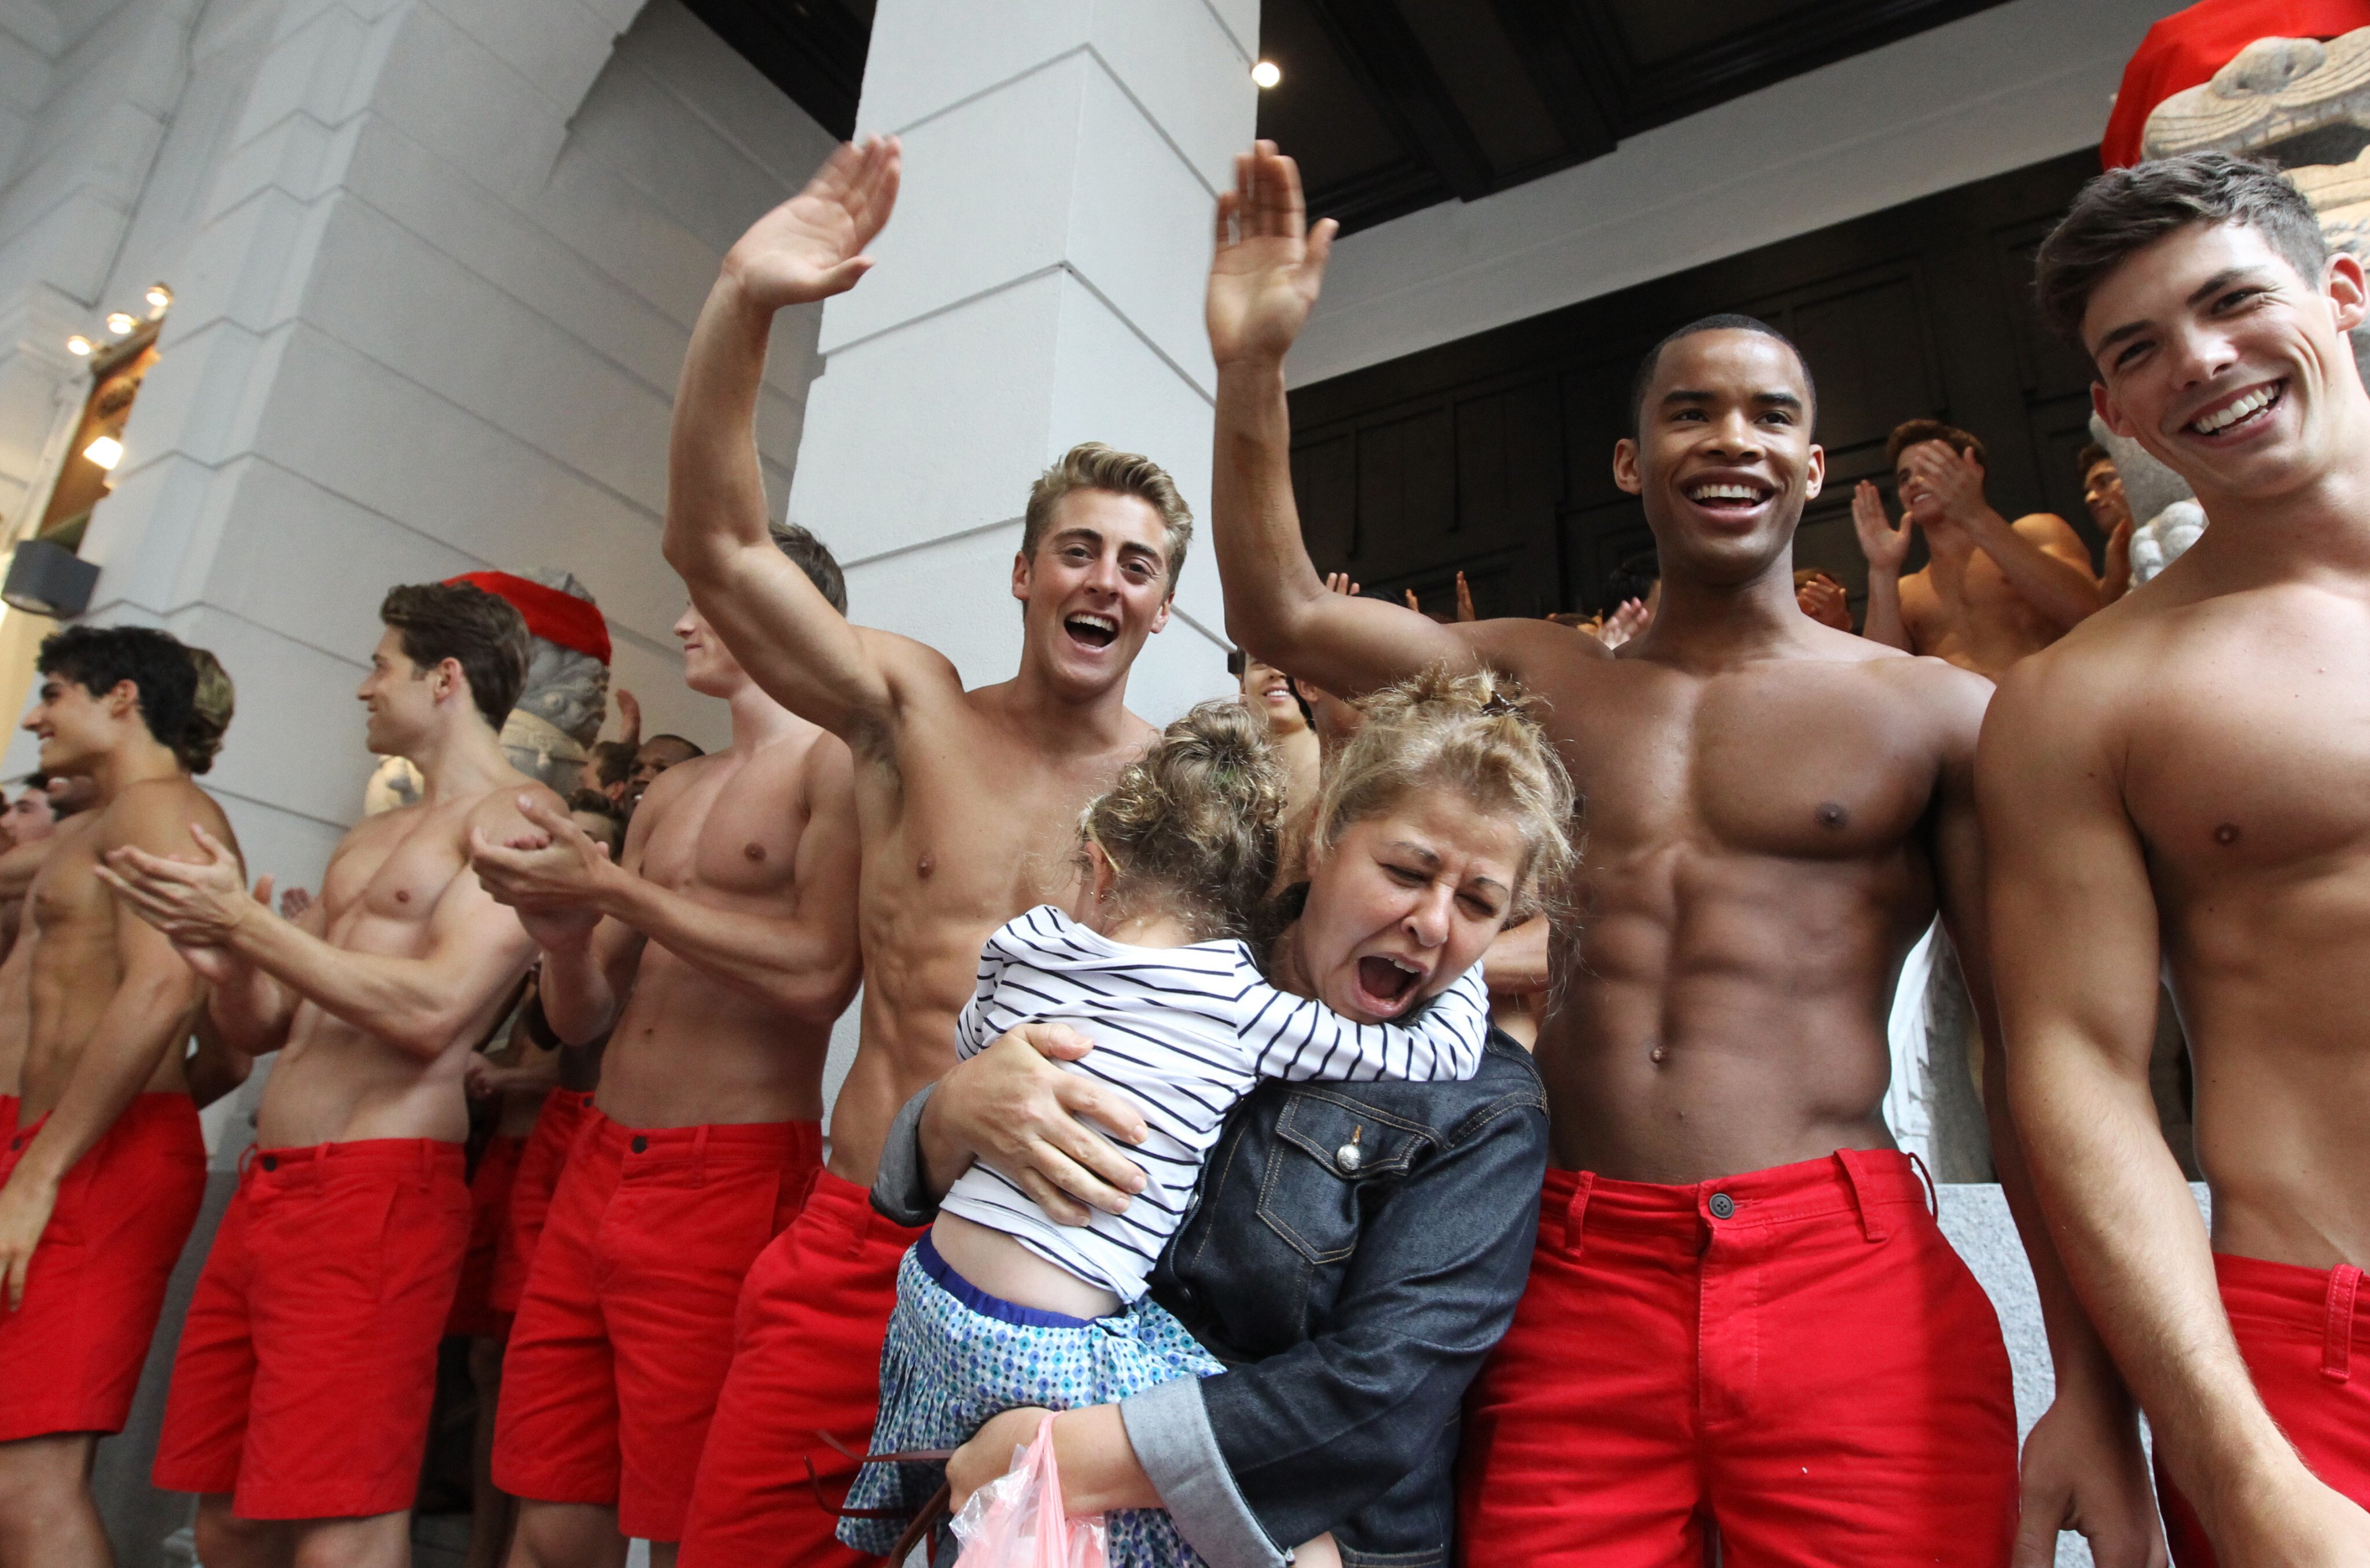 When Abercrombie & Fitch shop opened its first Hong Kong store in 2012, it brought in topless male models to promote it. The label is the subject of a new Netflix documentary. Photo: SCMP